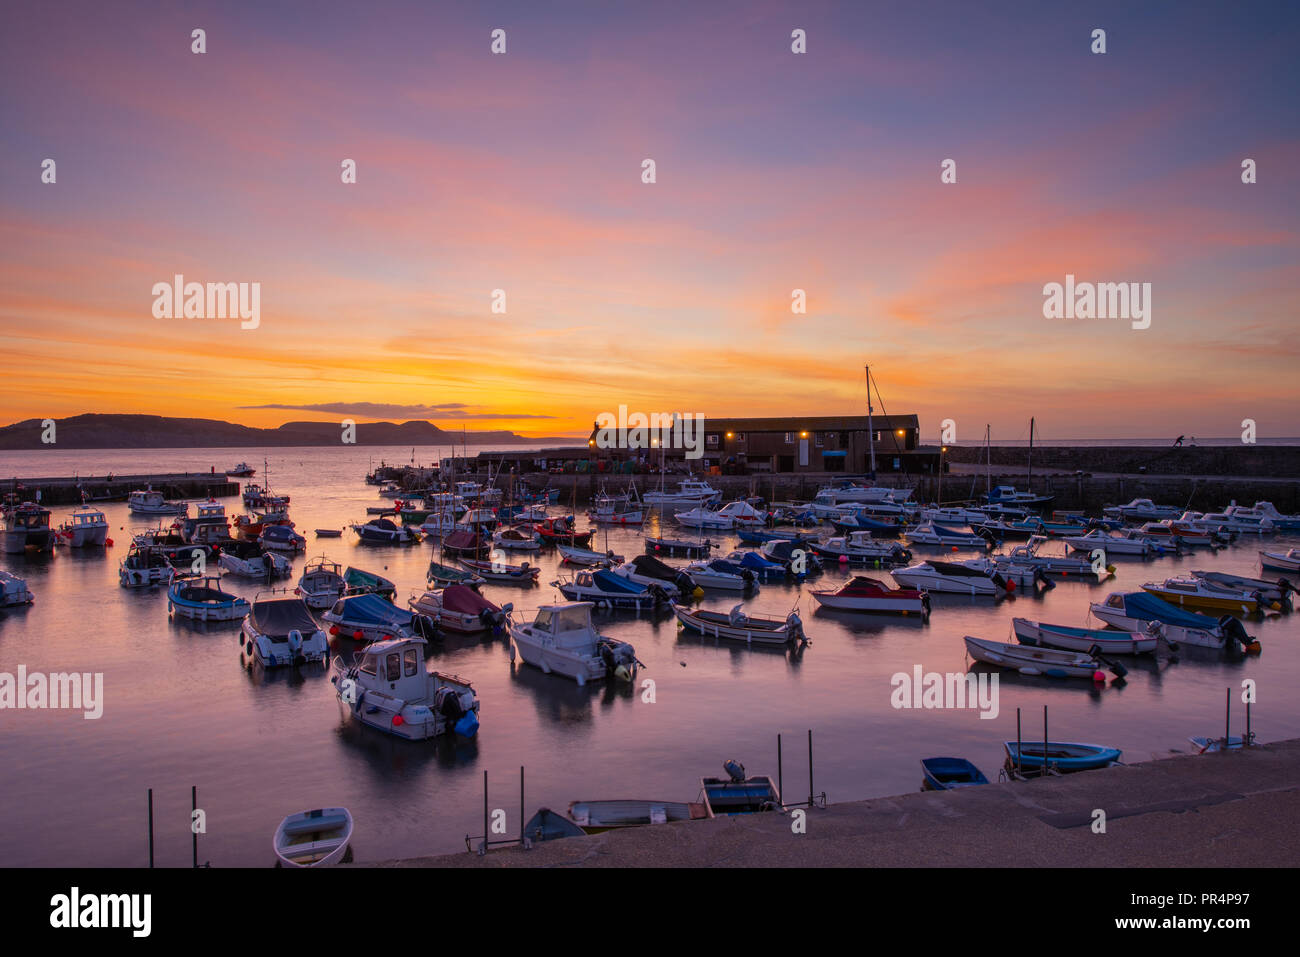 Lyme Regis, Dorset, UK. 29th September 2018.  UK Weather:  The skies over the Cobb Harbour glow with vibrant colour at the start of a sunny day at Lyme Regis.  Credit: Celia McMahon/Alamy Live News Stock Photo